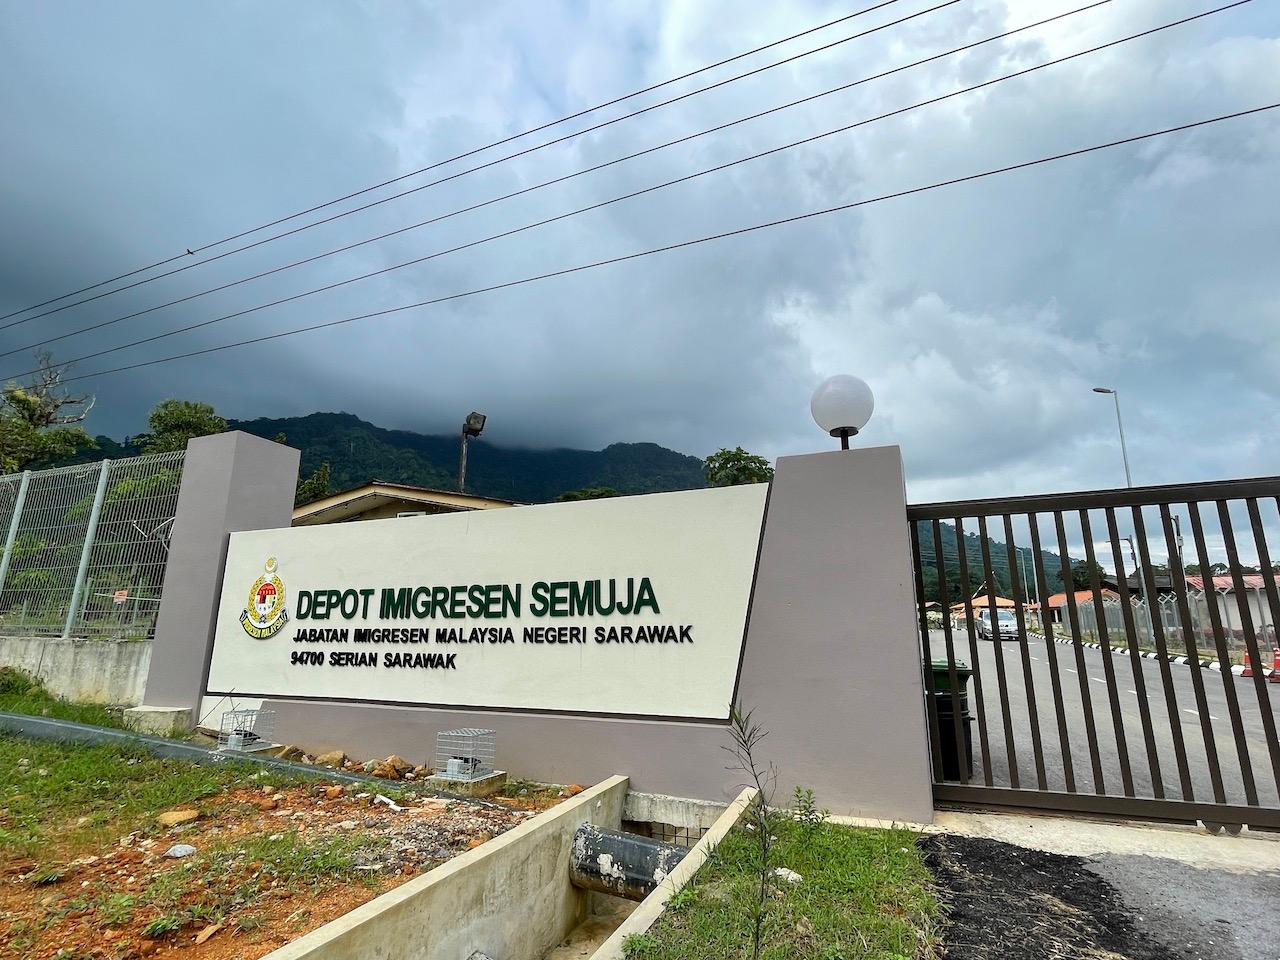 The Semuja immigration detention depot in Serian, which is linked to nearly half of the new Covid-19 cases recorded in Sarawak today.